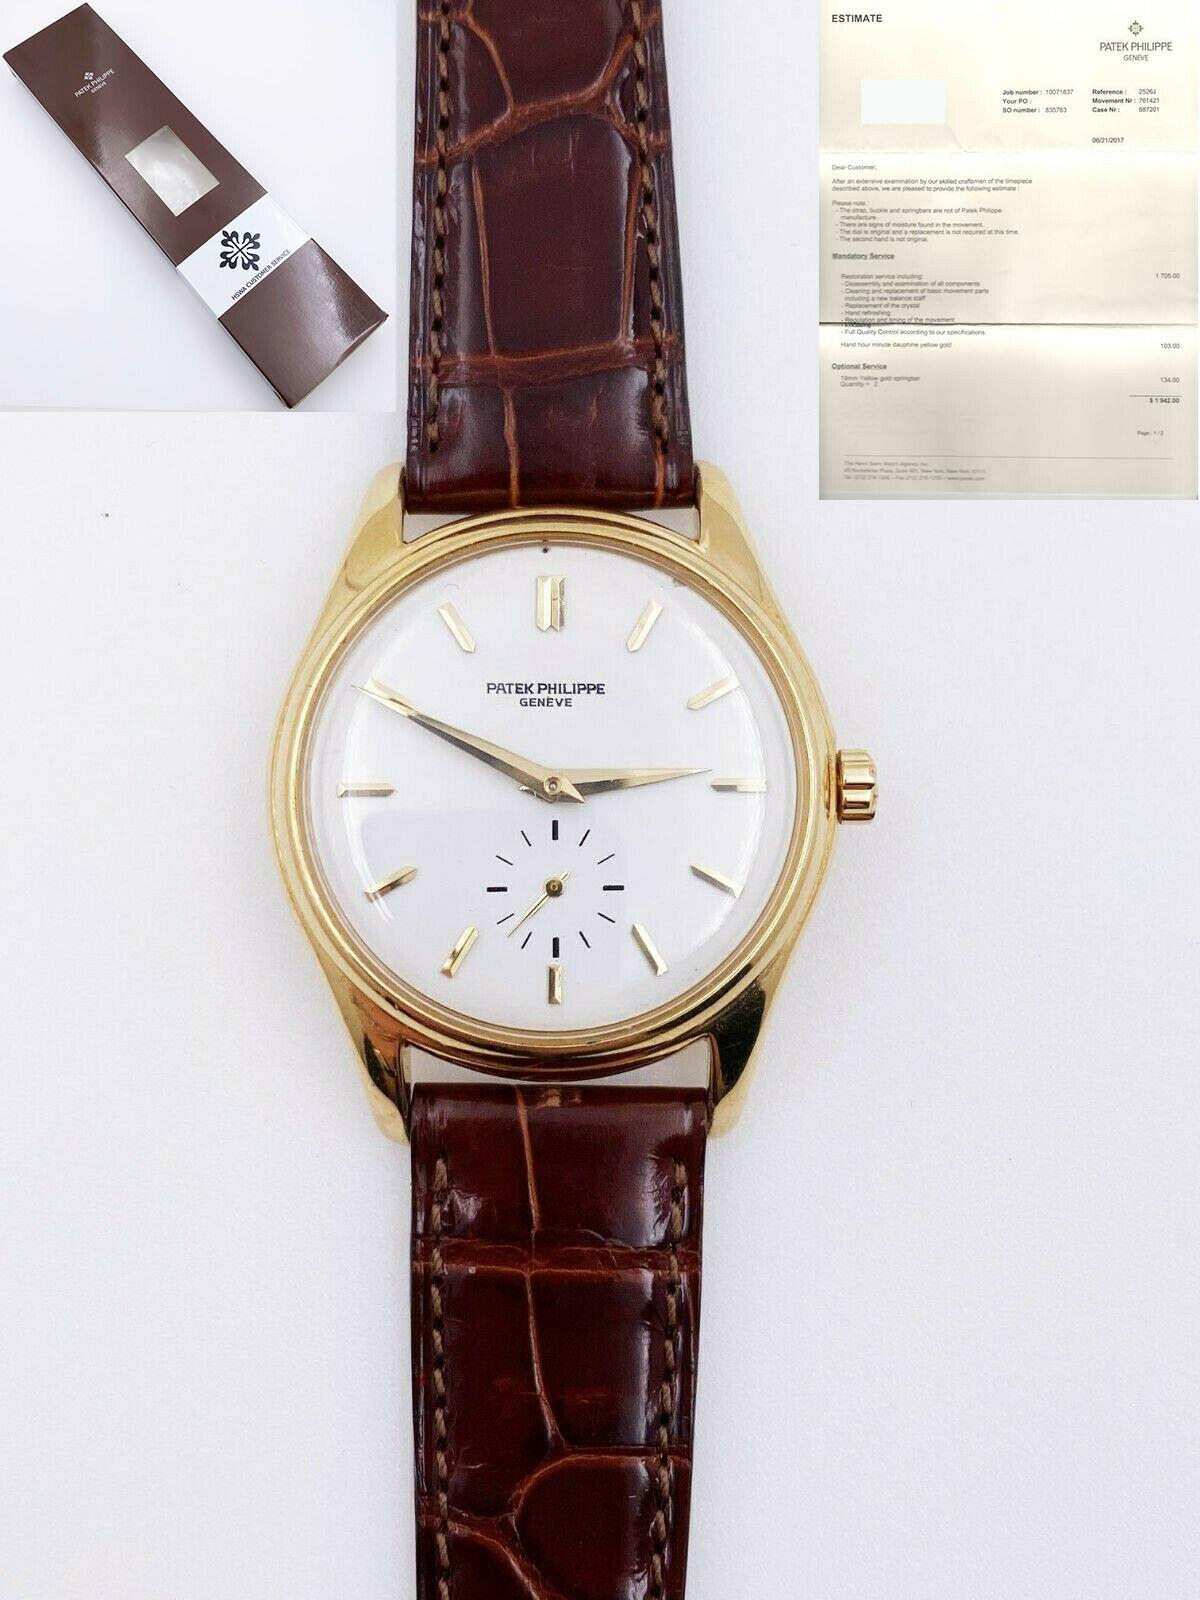 Reference Number: 2526J

Year: Estimated the 1950's

Model: Calatrava

Case Material: 18K Yellow Gold

Band: Brown Leather, Brand New Band

Bezel: 18K Yellow Gold

Dial: White

Face: Sapphire Crystal

Case Size: 38mm

Includes: 
-Patek Service Box &